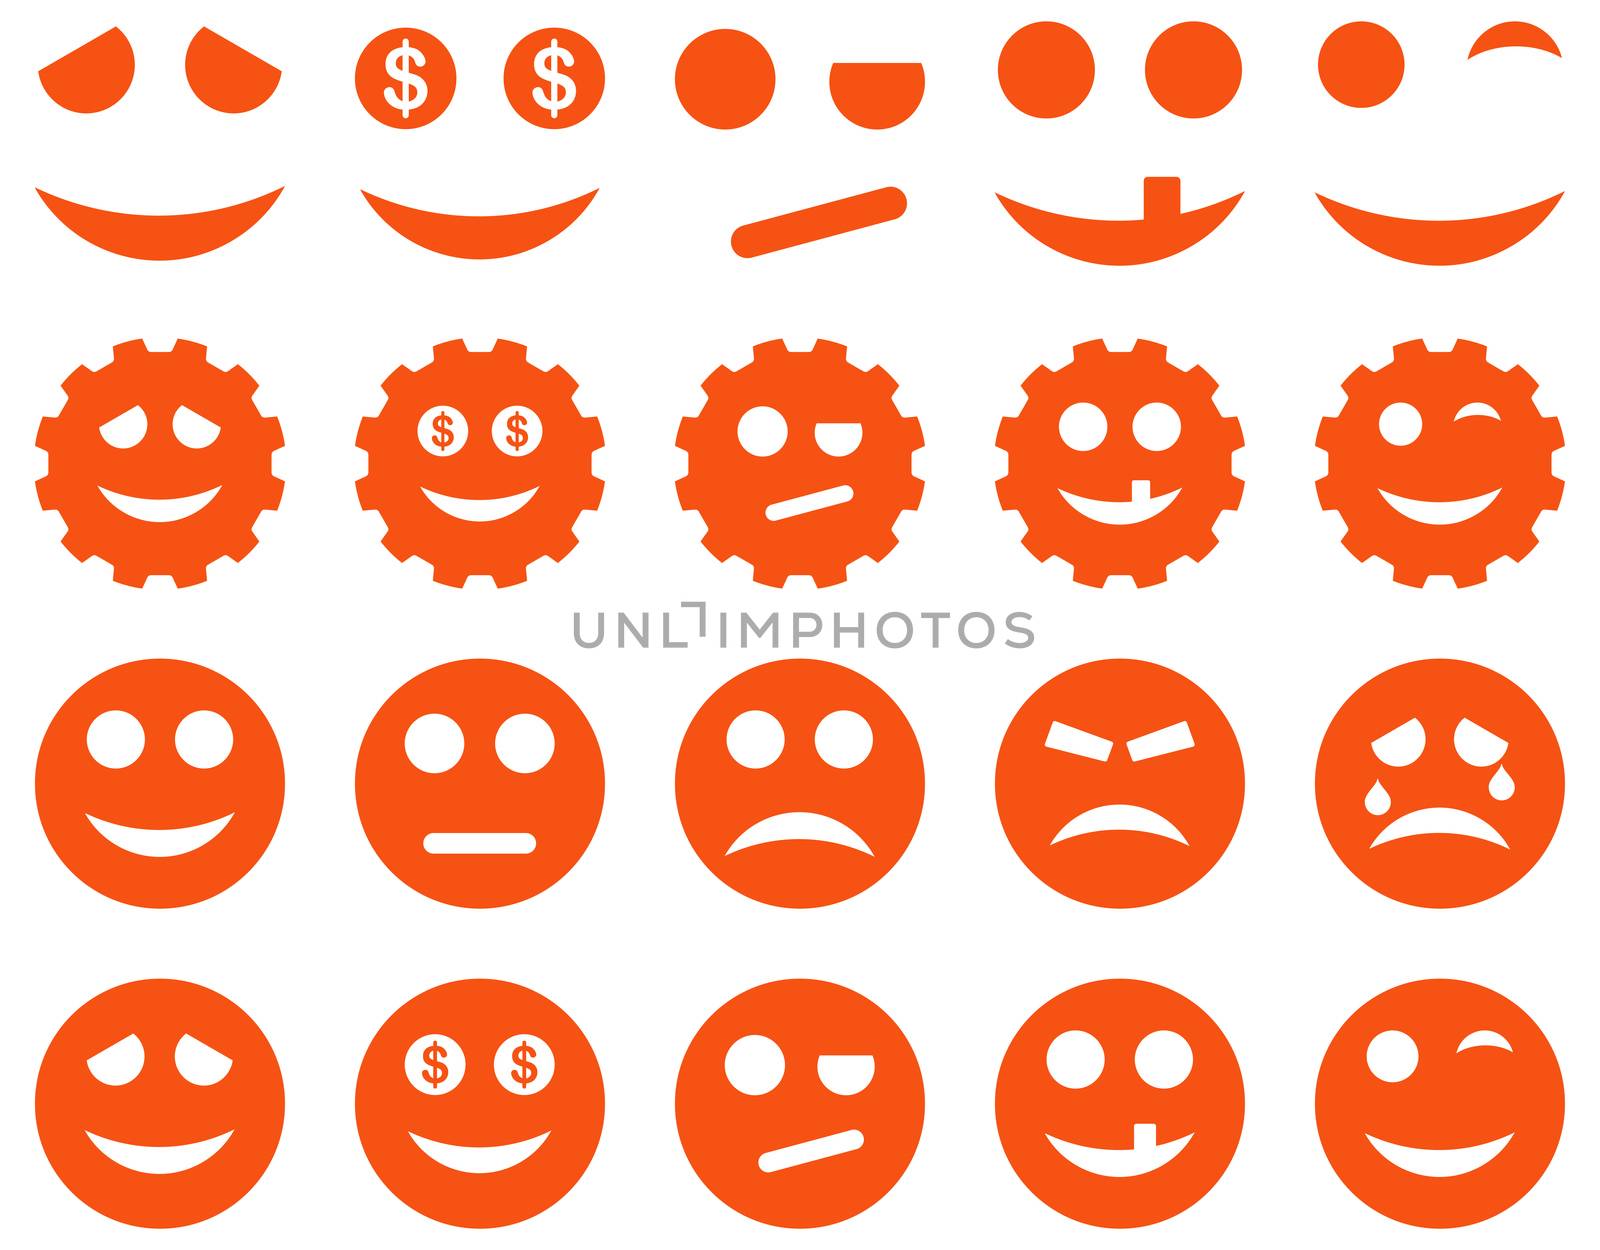 Tools, gears, smiles, emoticons icons. Glyph set style is flat images, orange symbols, isolated on a white background.